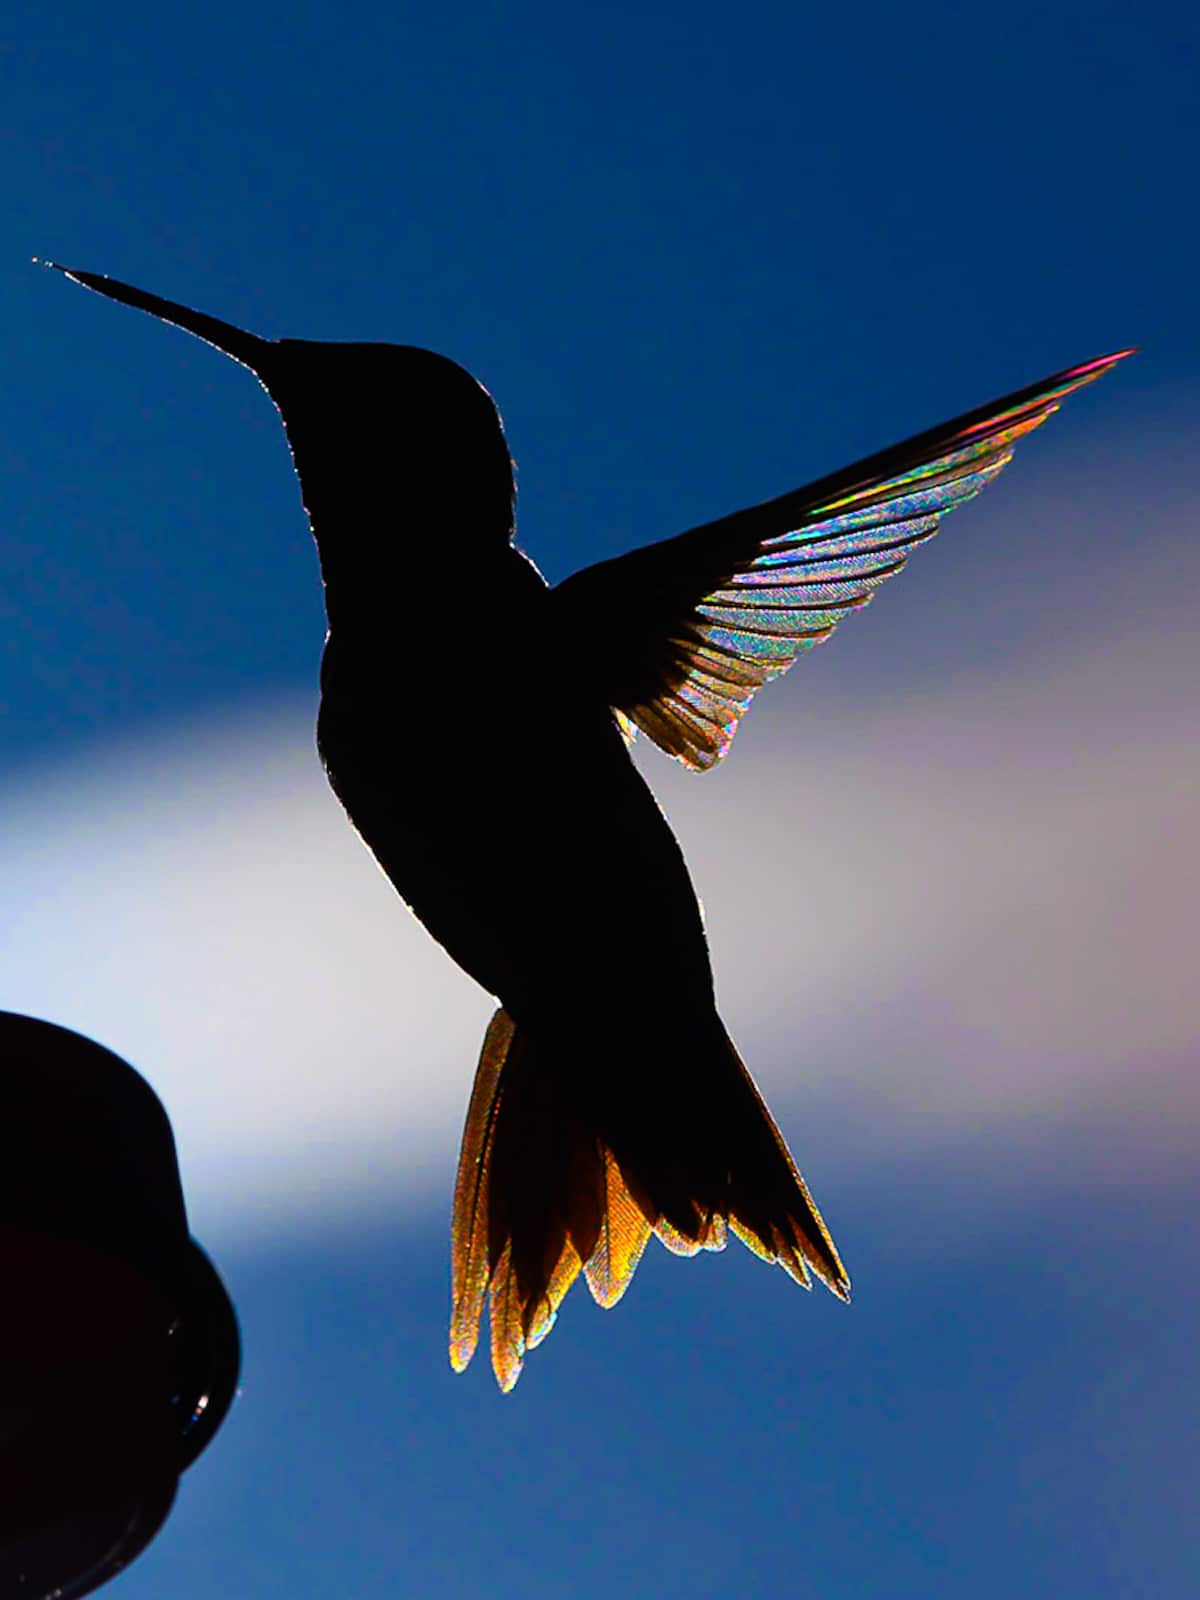 Stan Maupin pictures of the hummingbird